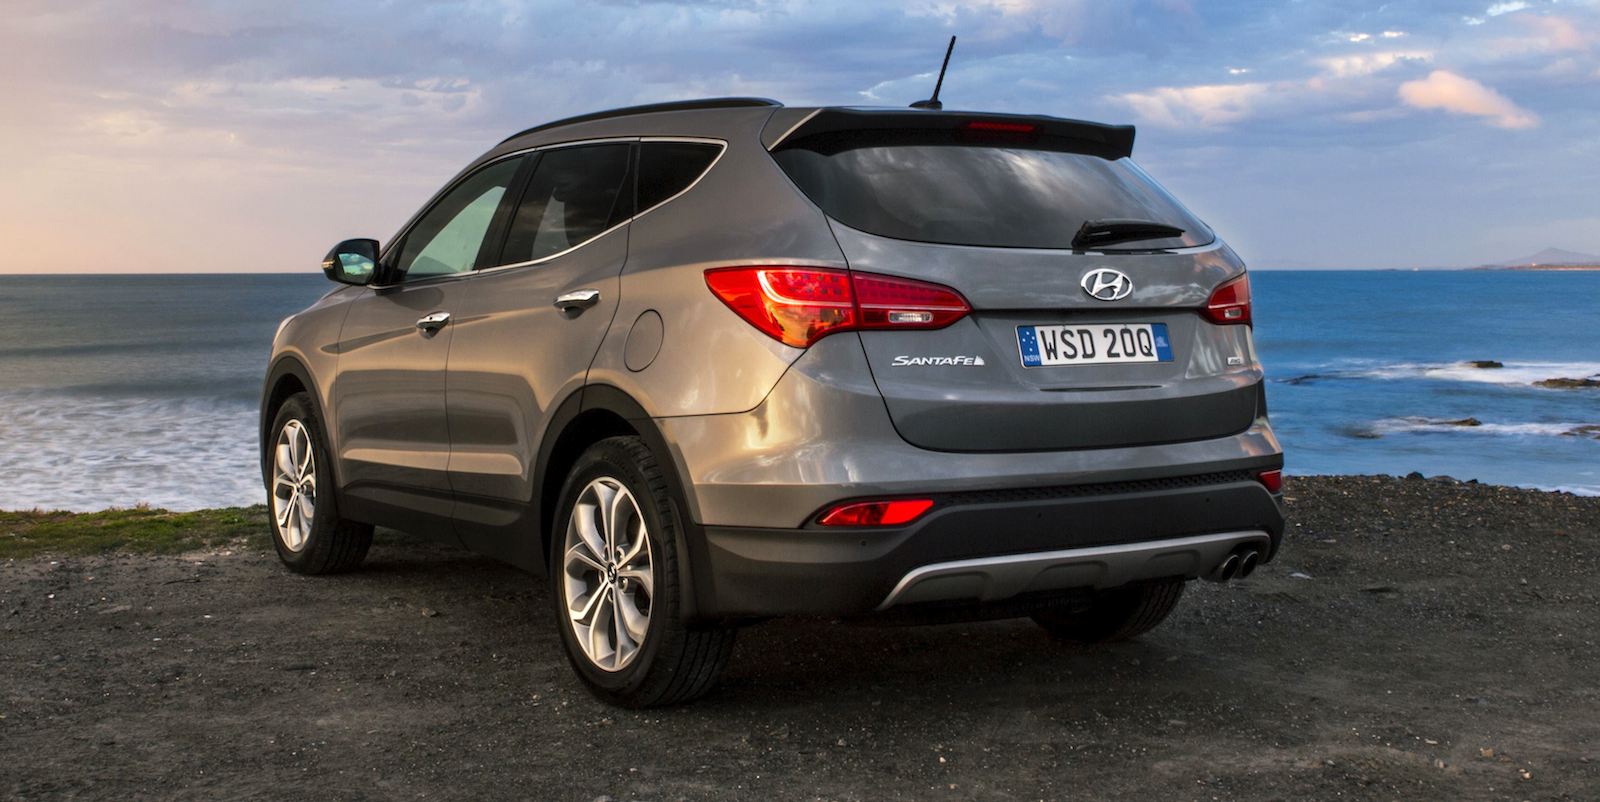 2015 Hyundai Santa Fe pricing and specifications Photos 1 of 2 